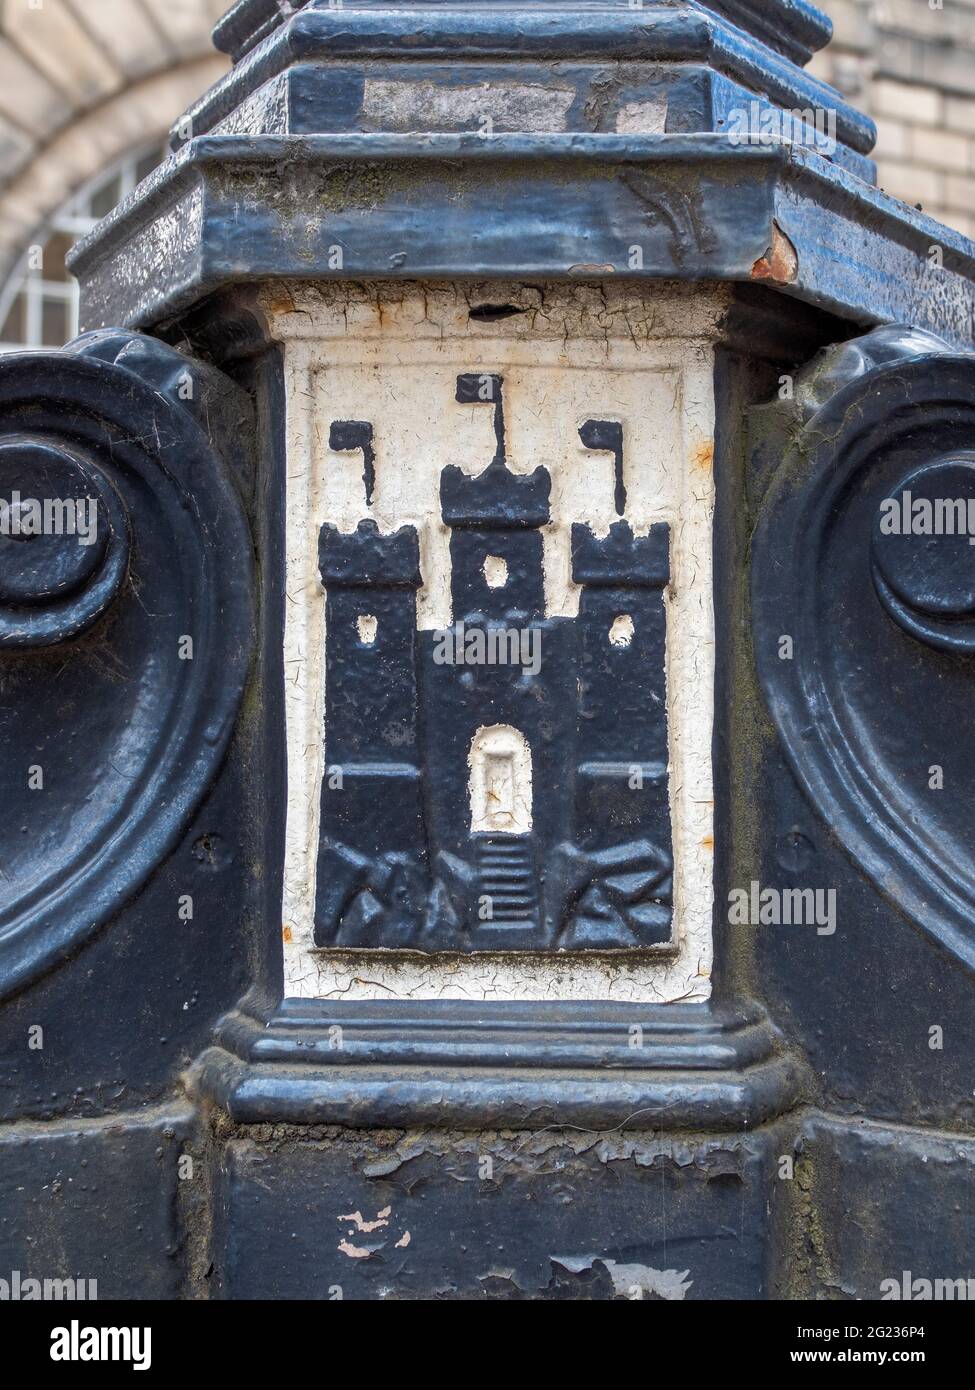 Detail shot of a lamp post featuring part of the Crest of the City of Edinburgh, Scotland, UK. Stock Photo